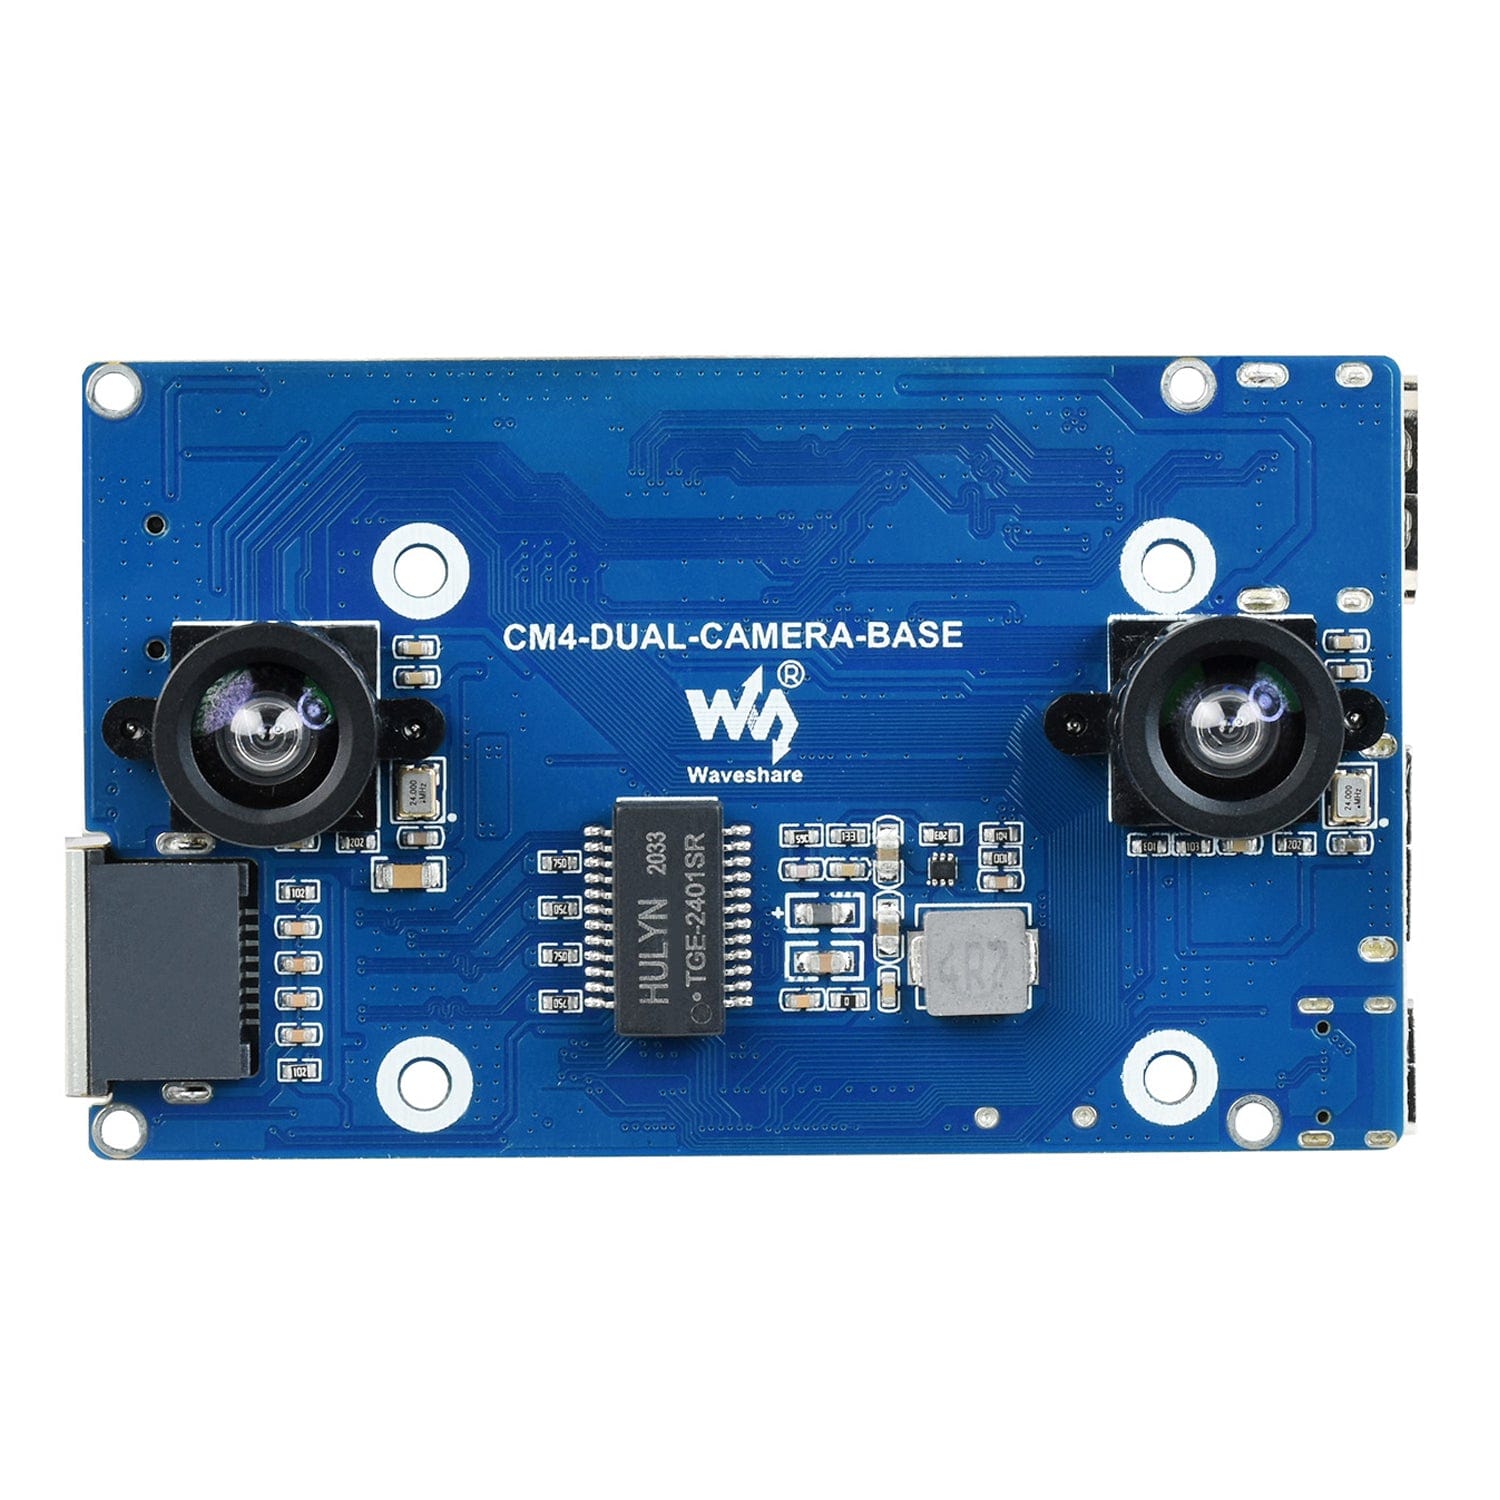 Binocular Camera Base Board for CM4 with Interface Expander - The Pi Hut